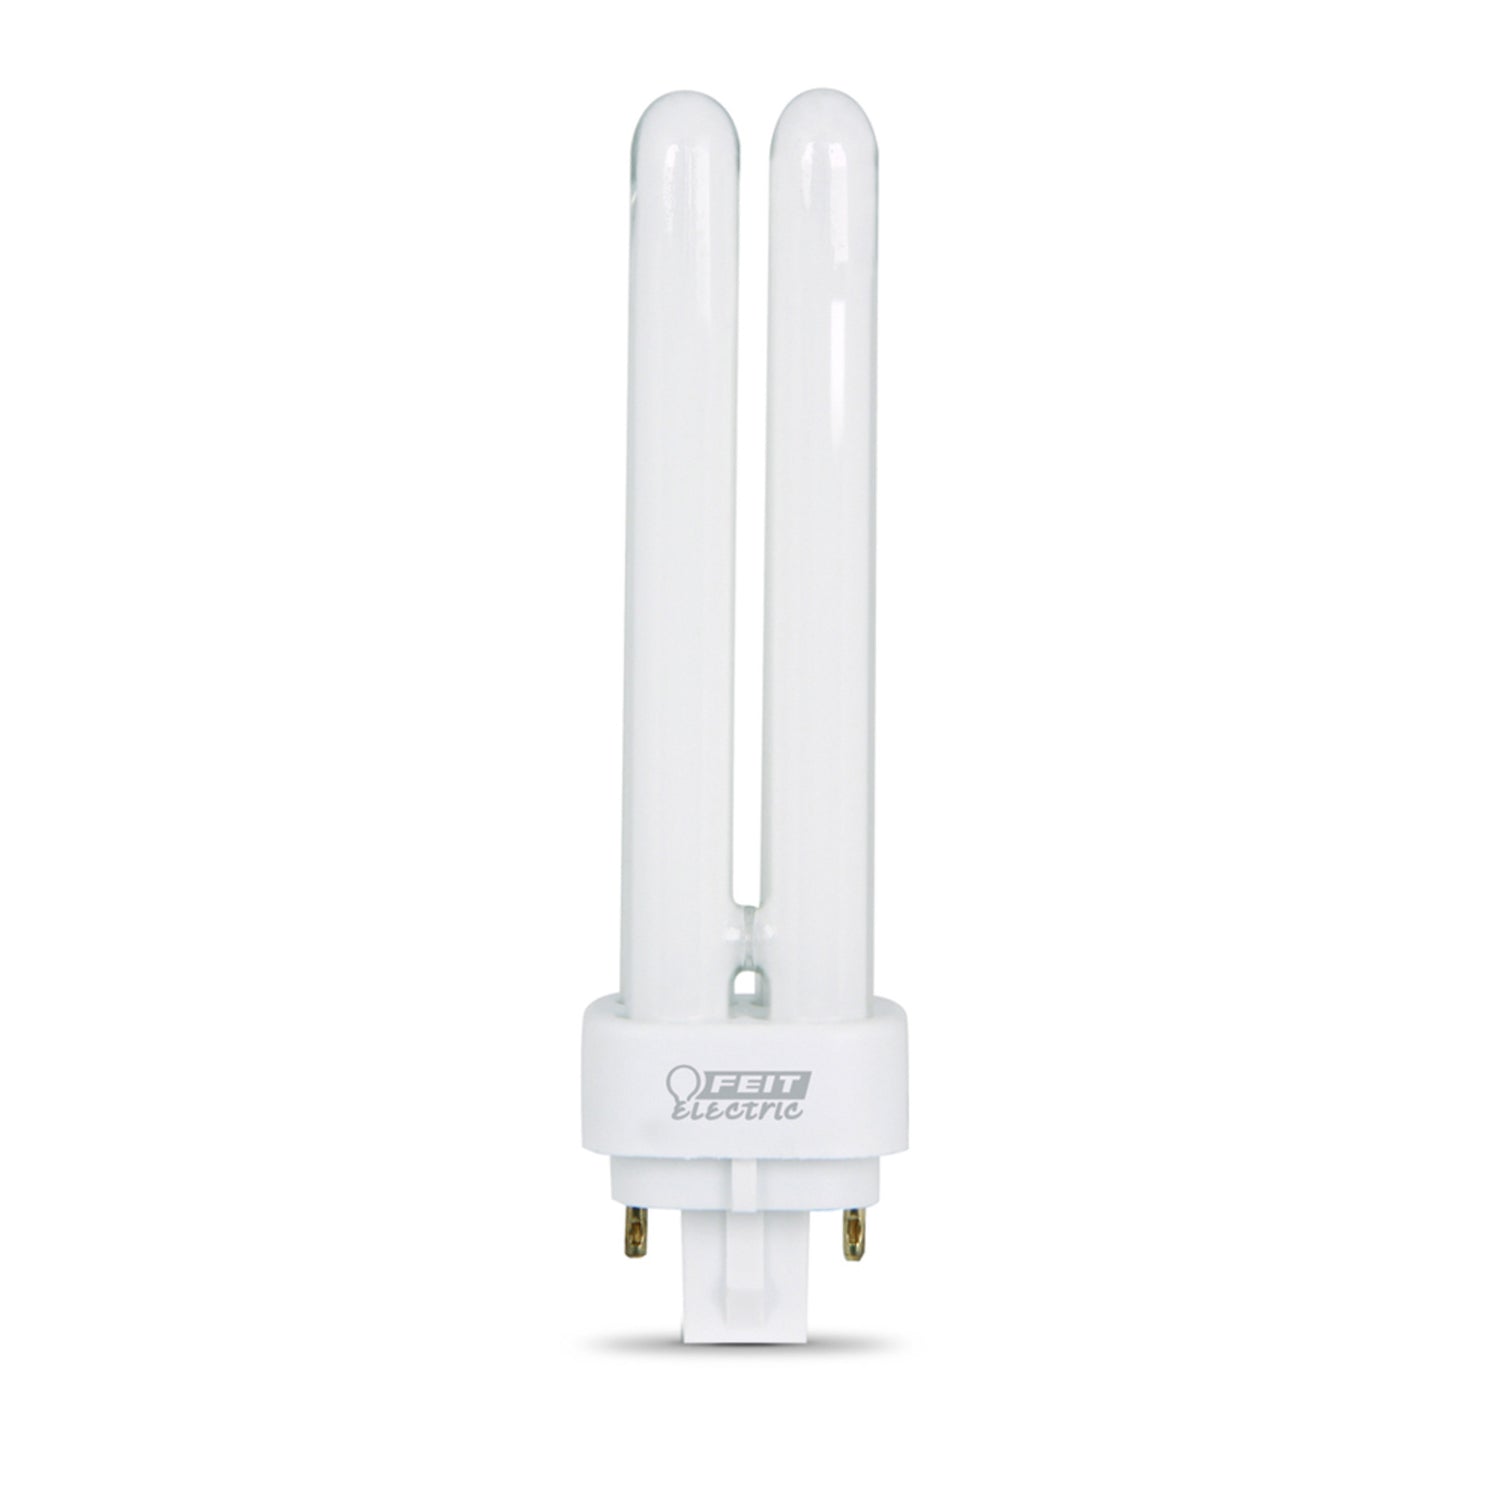 13W Cool White (4100K) PLD Double Twin Tube G24Q-1 Base Compact Fluorescent Light Bulb